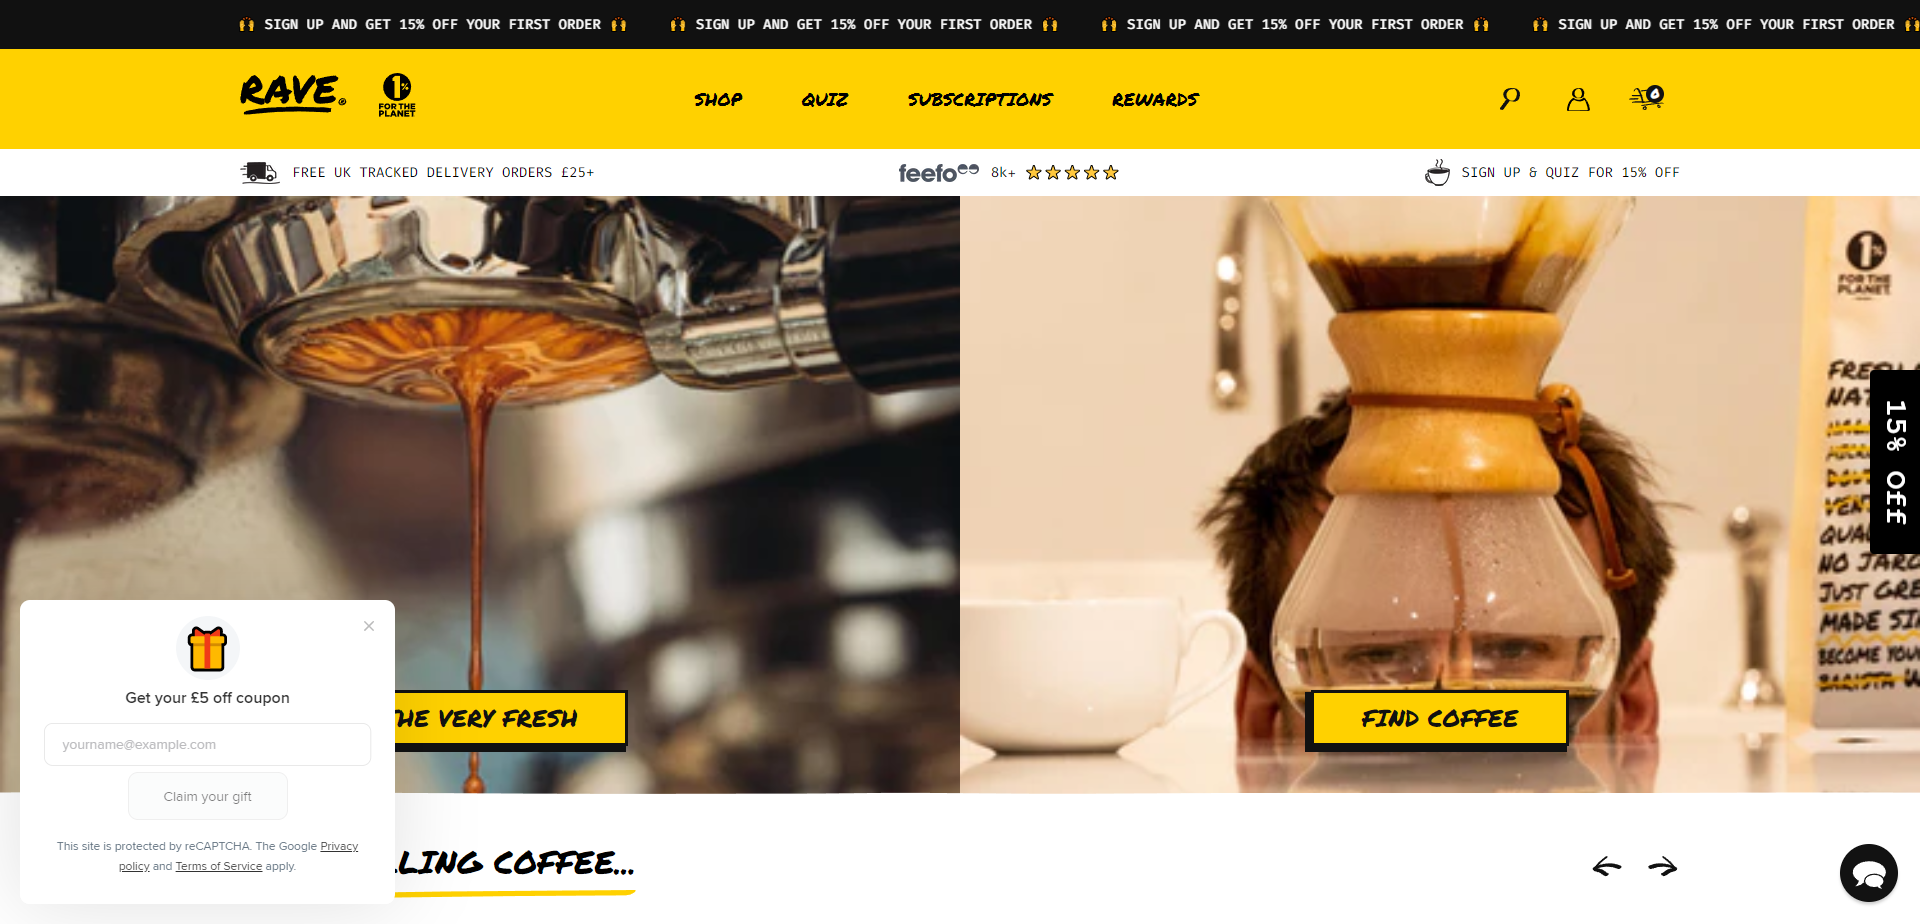 Landing Page for Rave Coffee